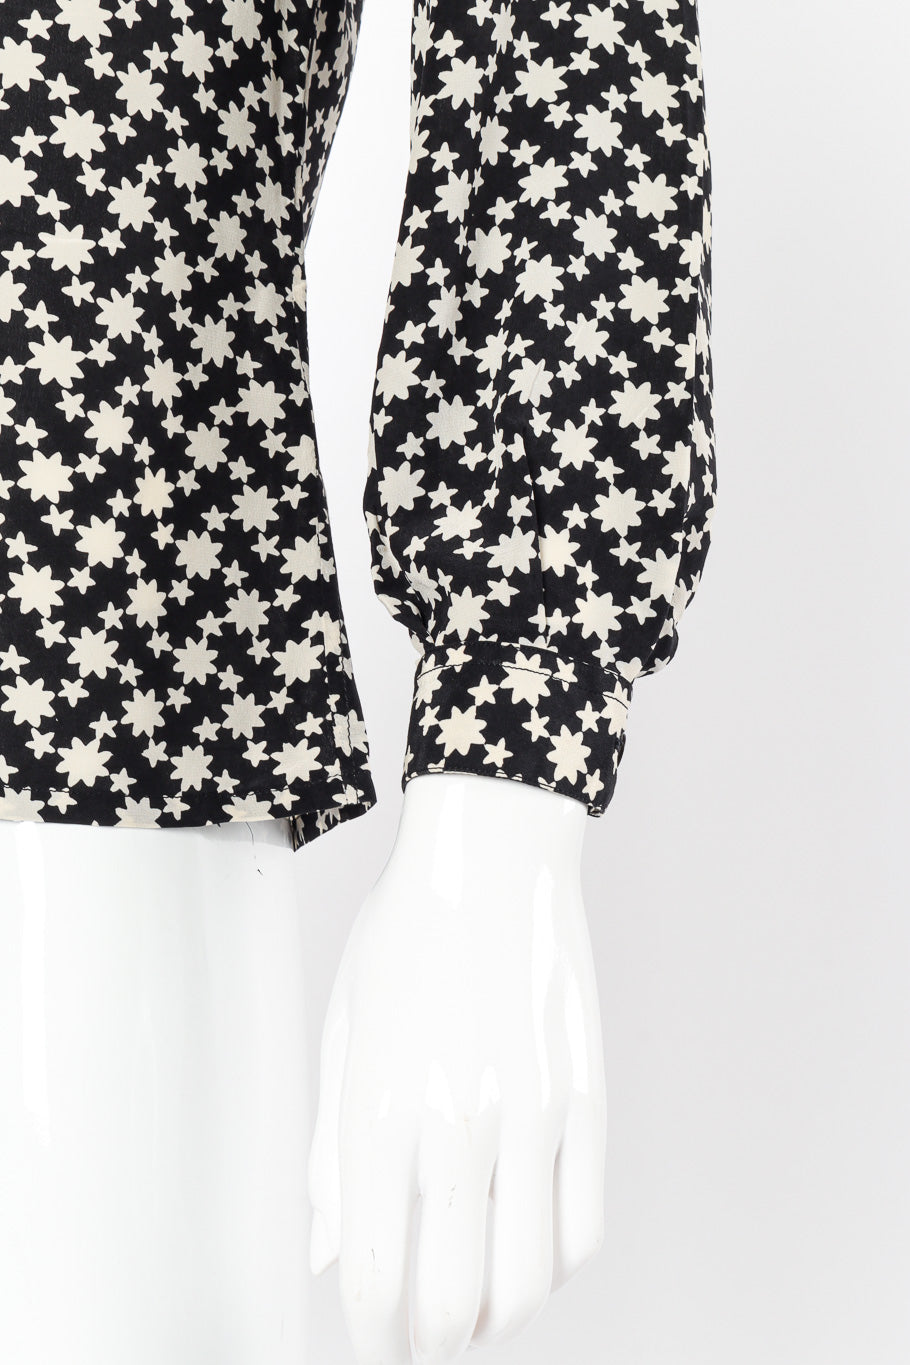 Star print blouse by Yves Saint Laurent on mannequin sleeve cuff close @recessla